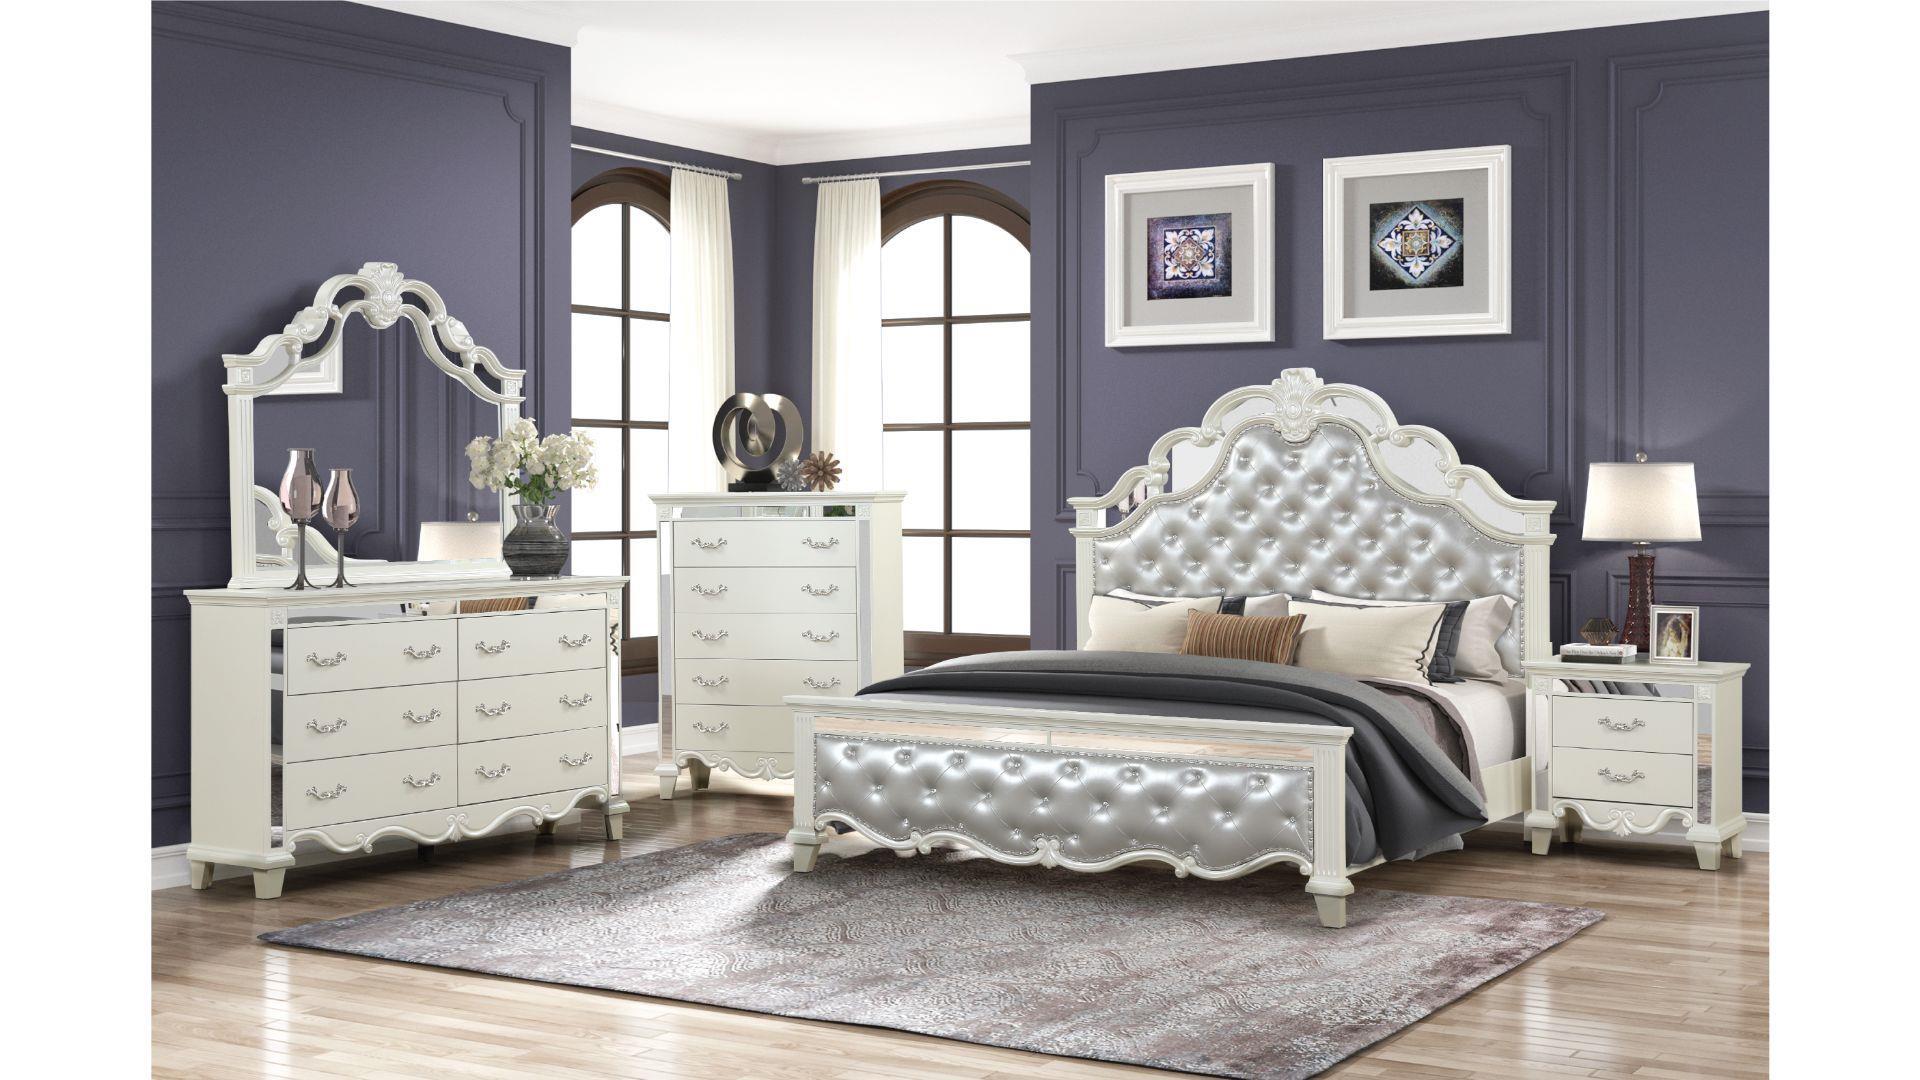 

    
Milky White  Tufted King Bedroom Set 5P MILAN Galaxy Home Contemporary Modern
